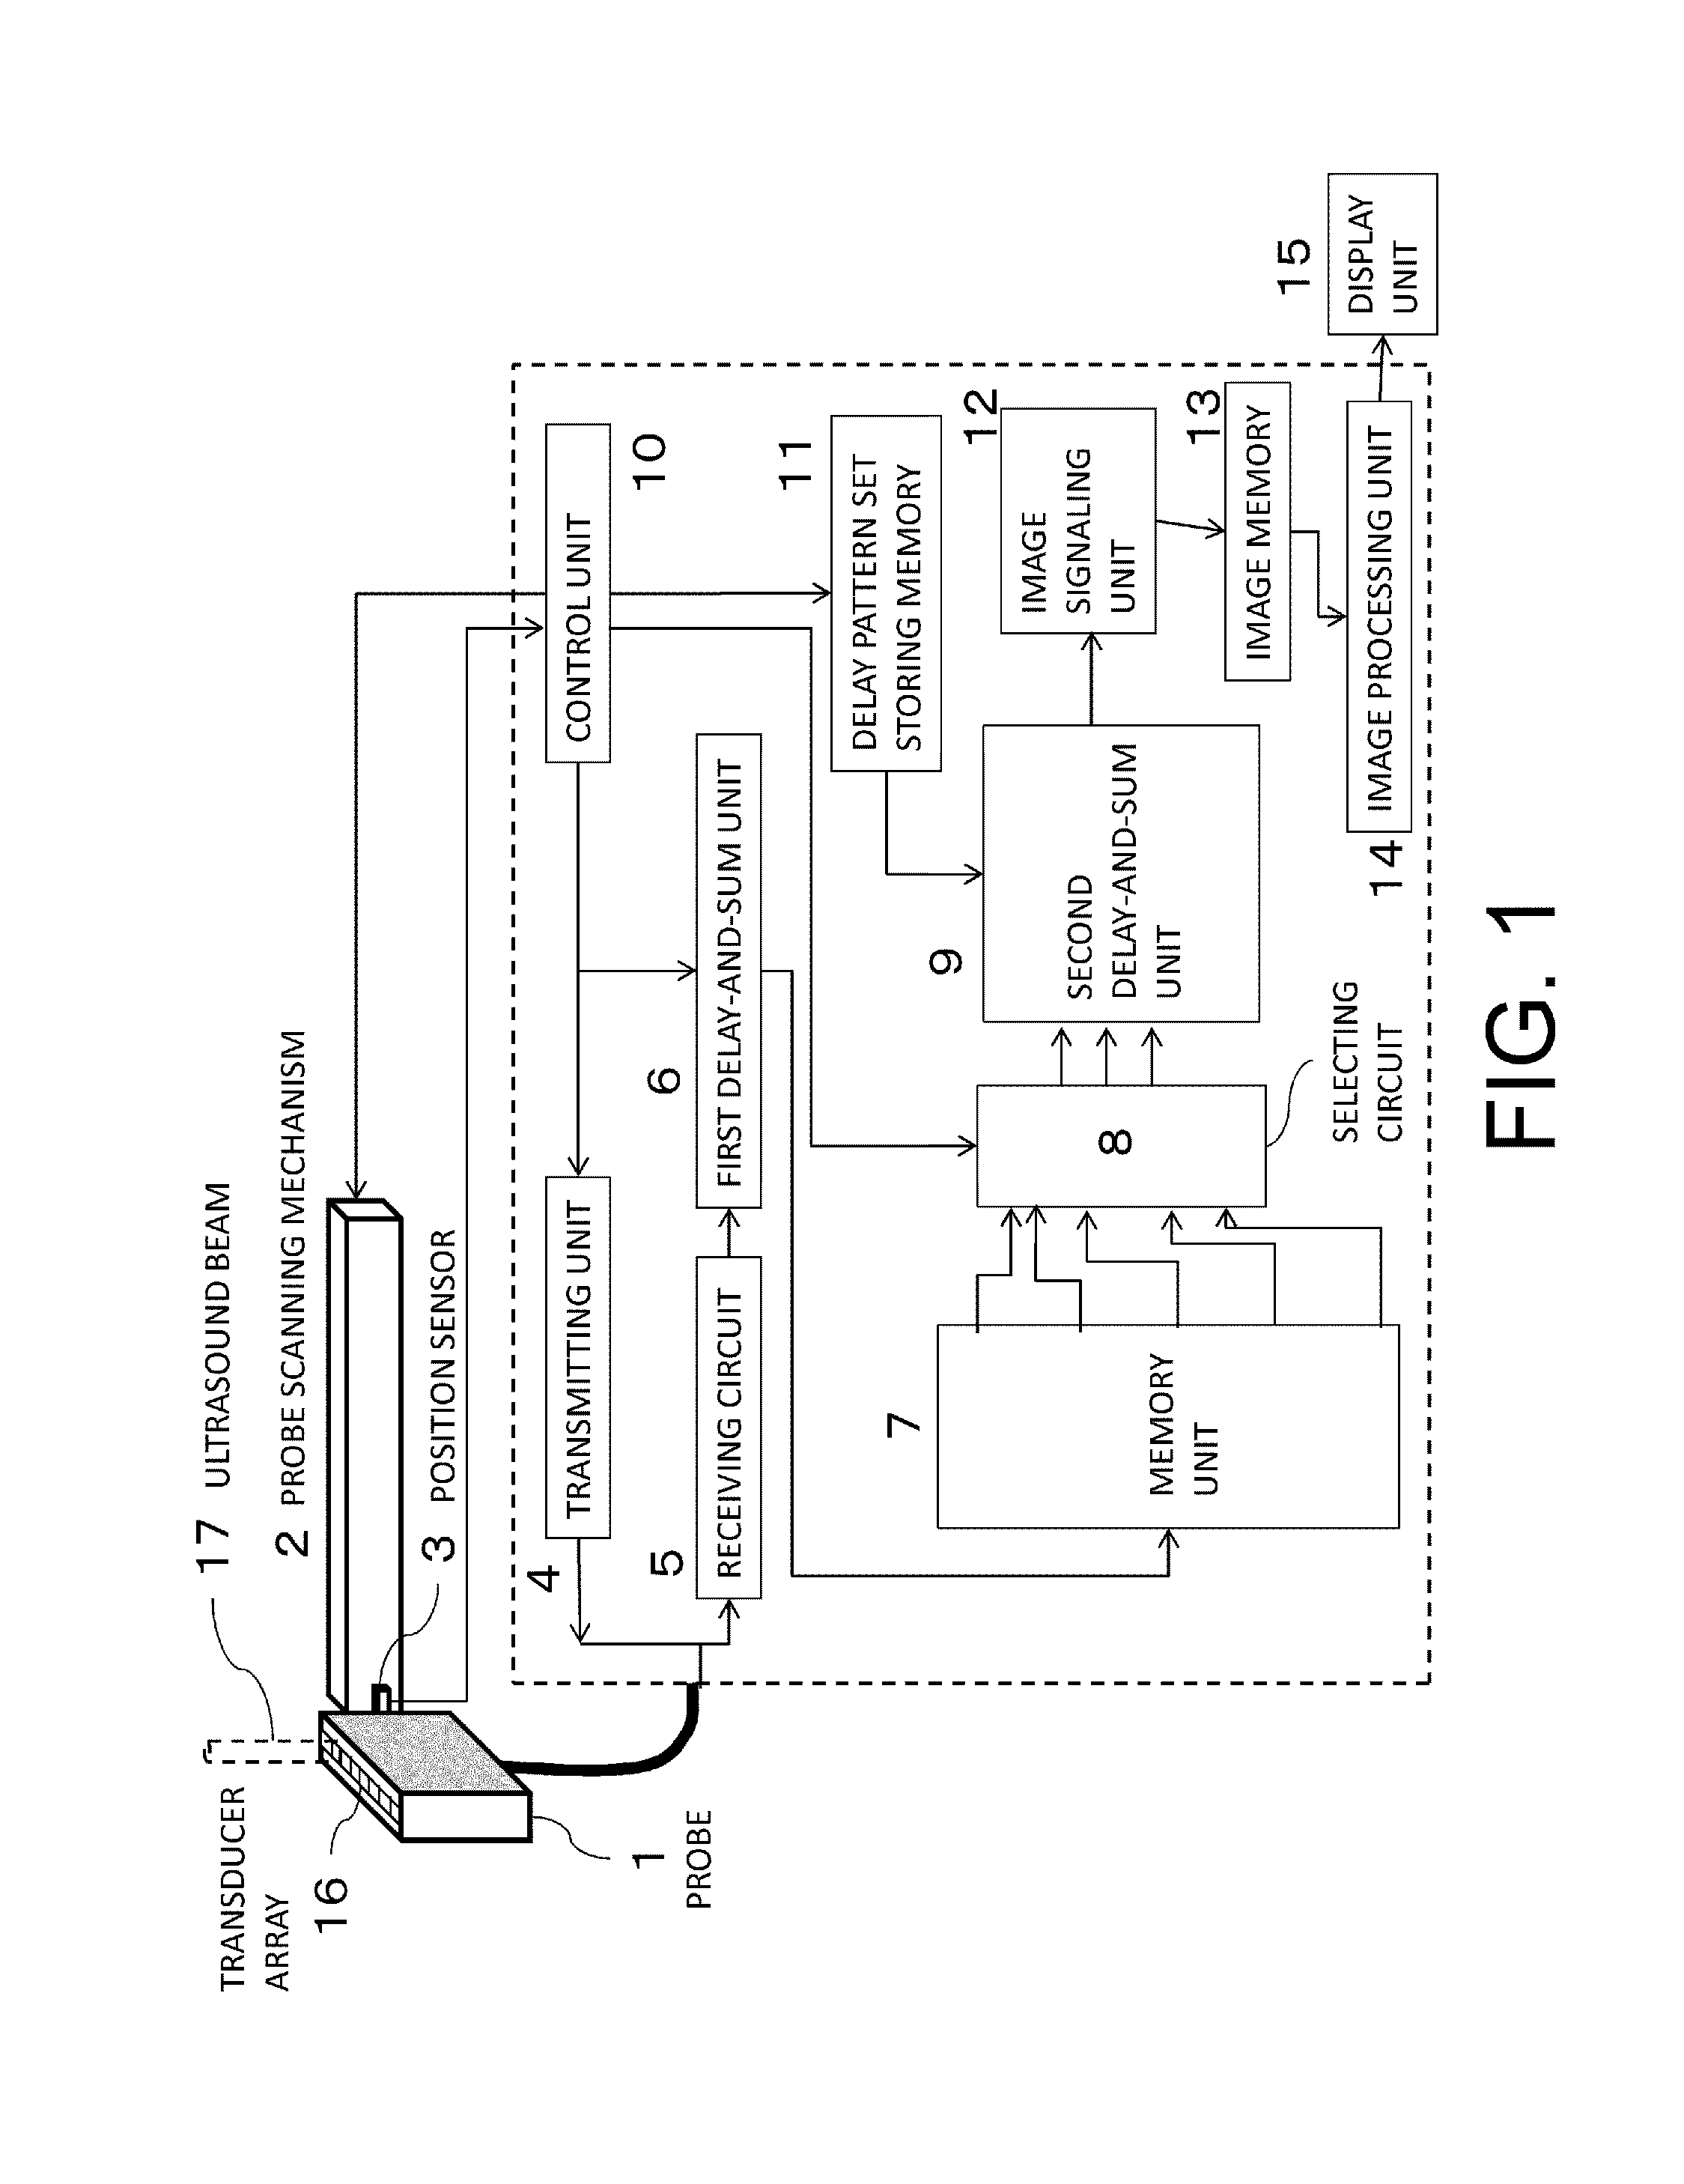 Object information acquiring apparatus